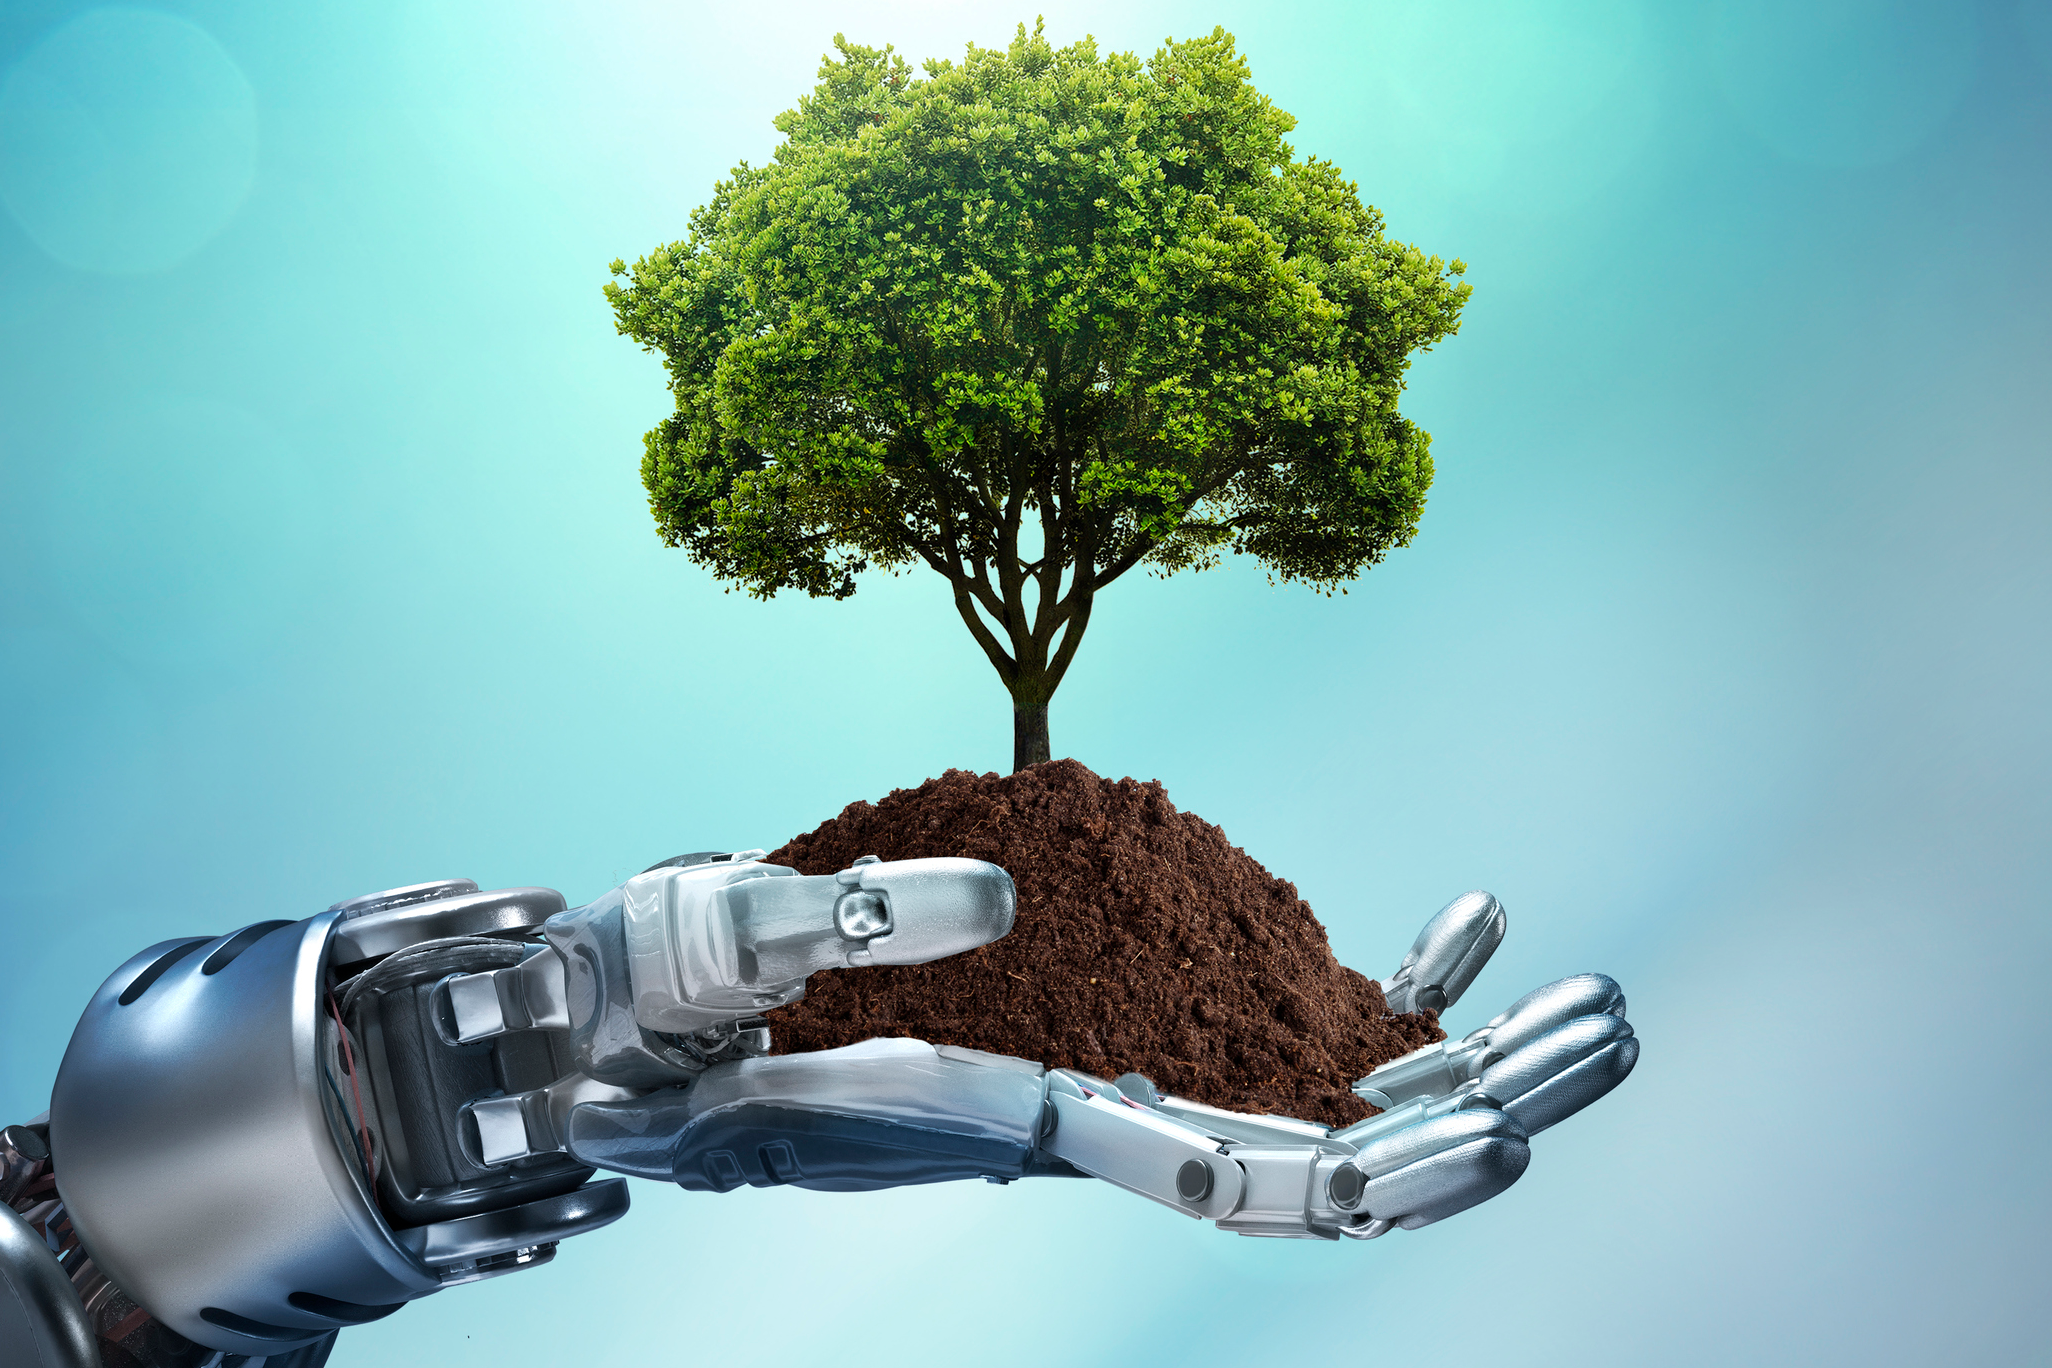 Technology: Advancements and Environmental Impacts